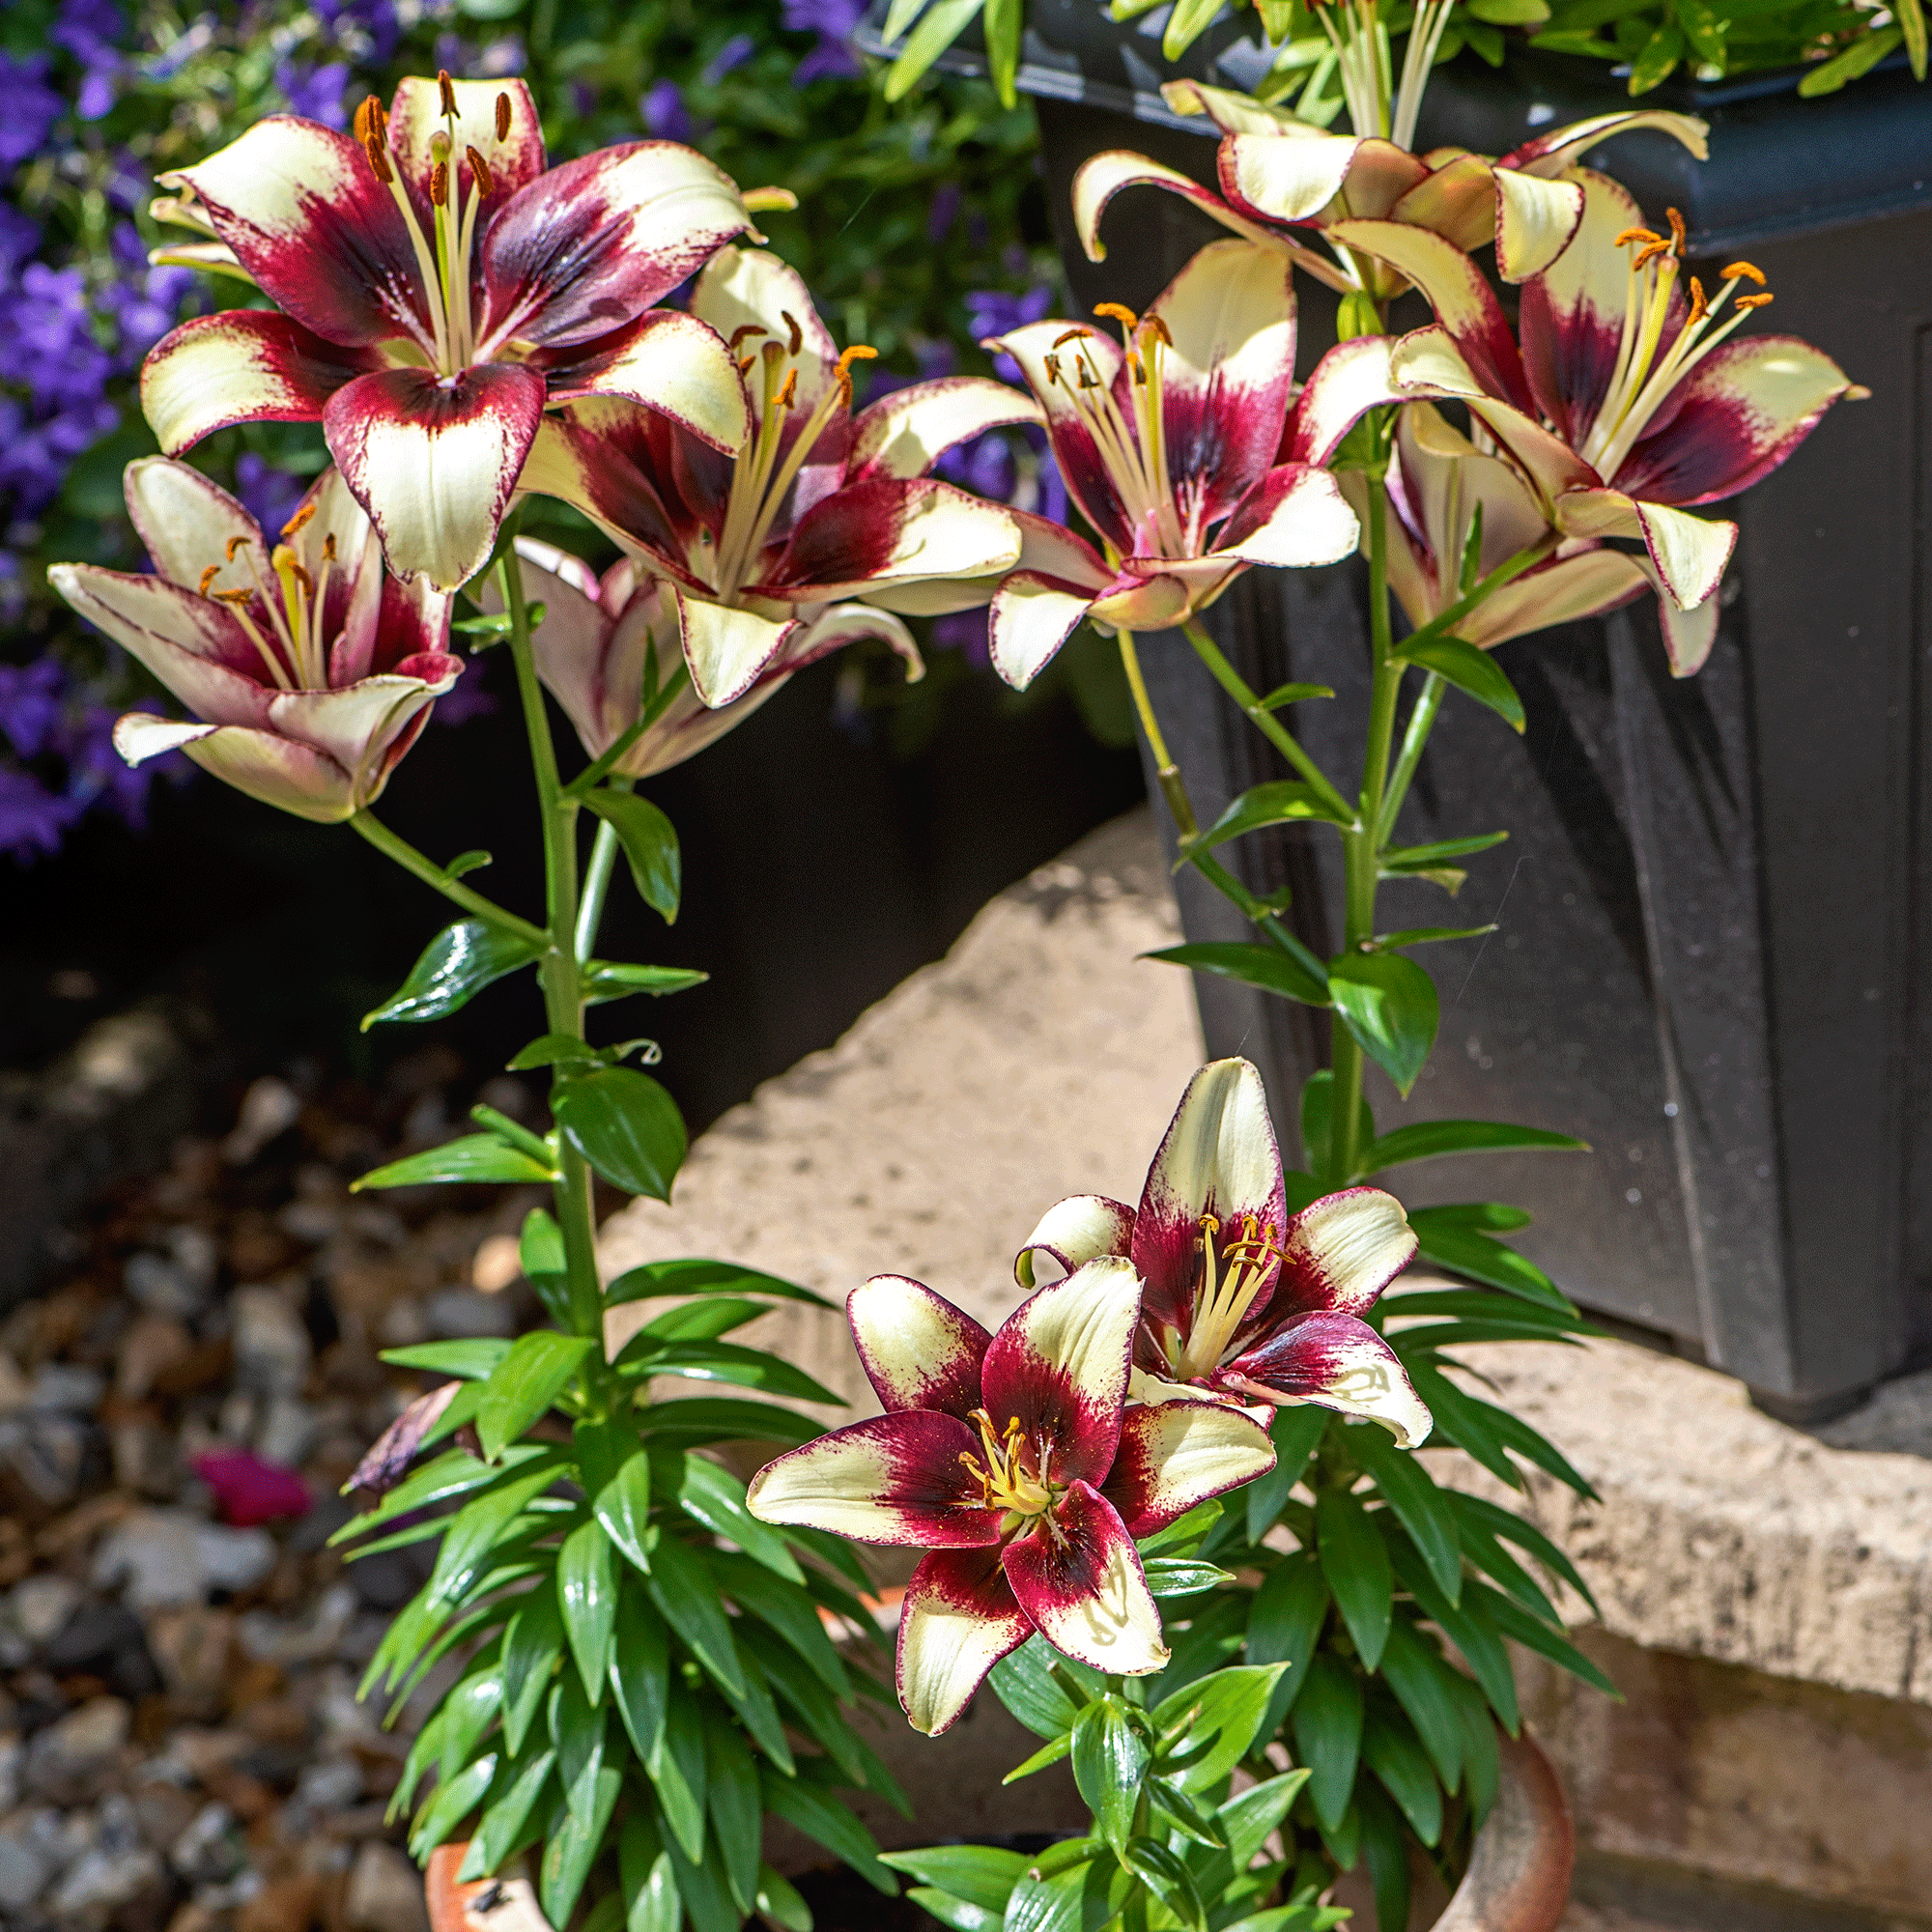 White and brown lillies